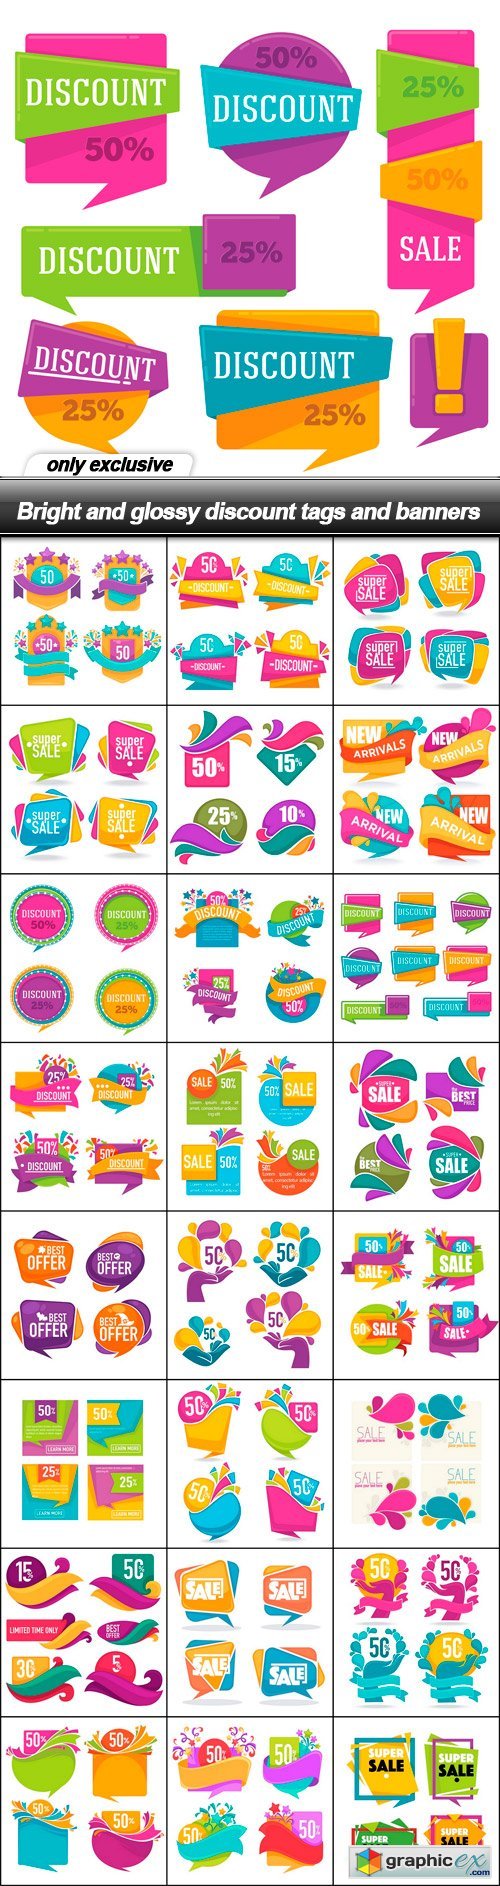 Bright and glossy discount tags and banners - 25 EPS